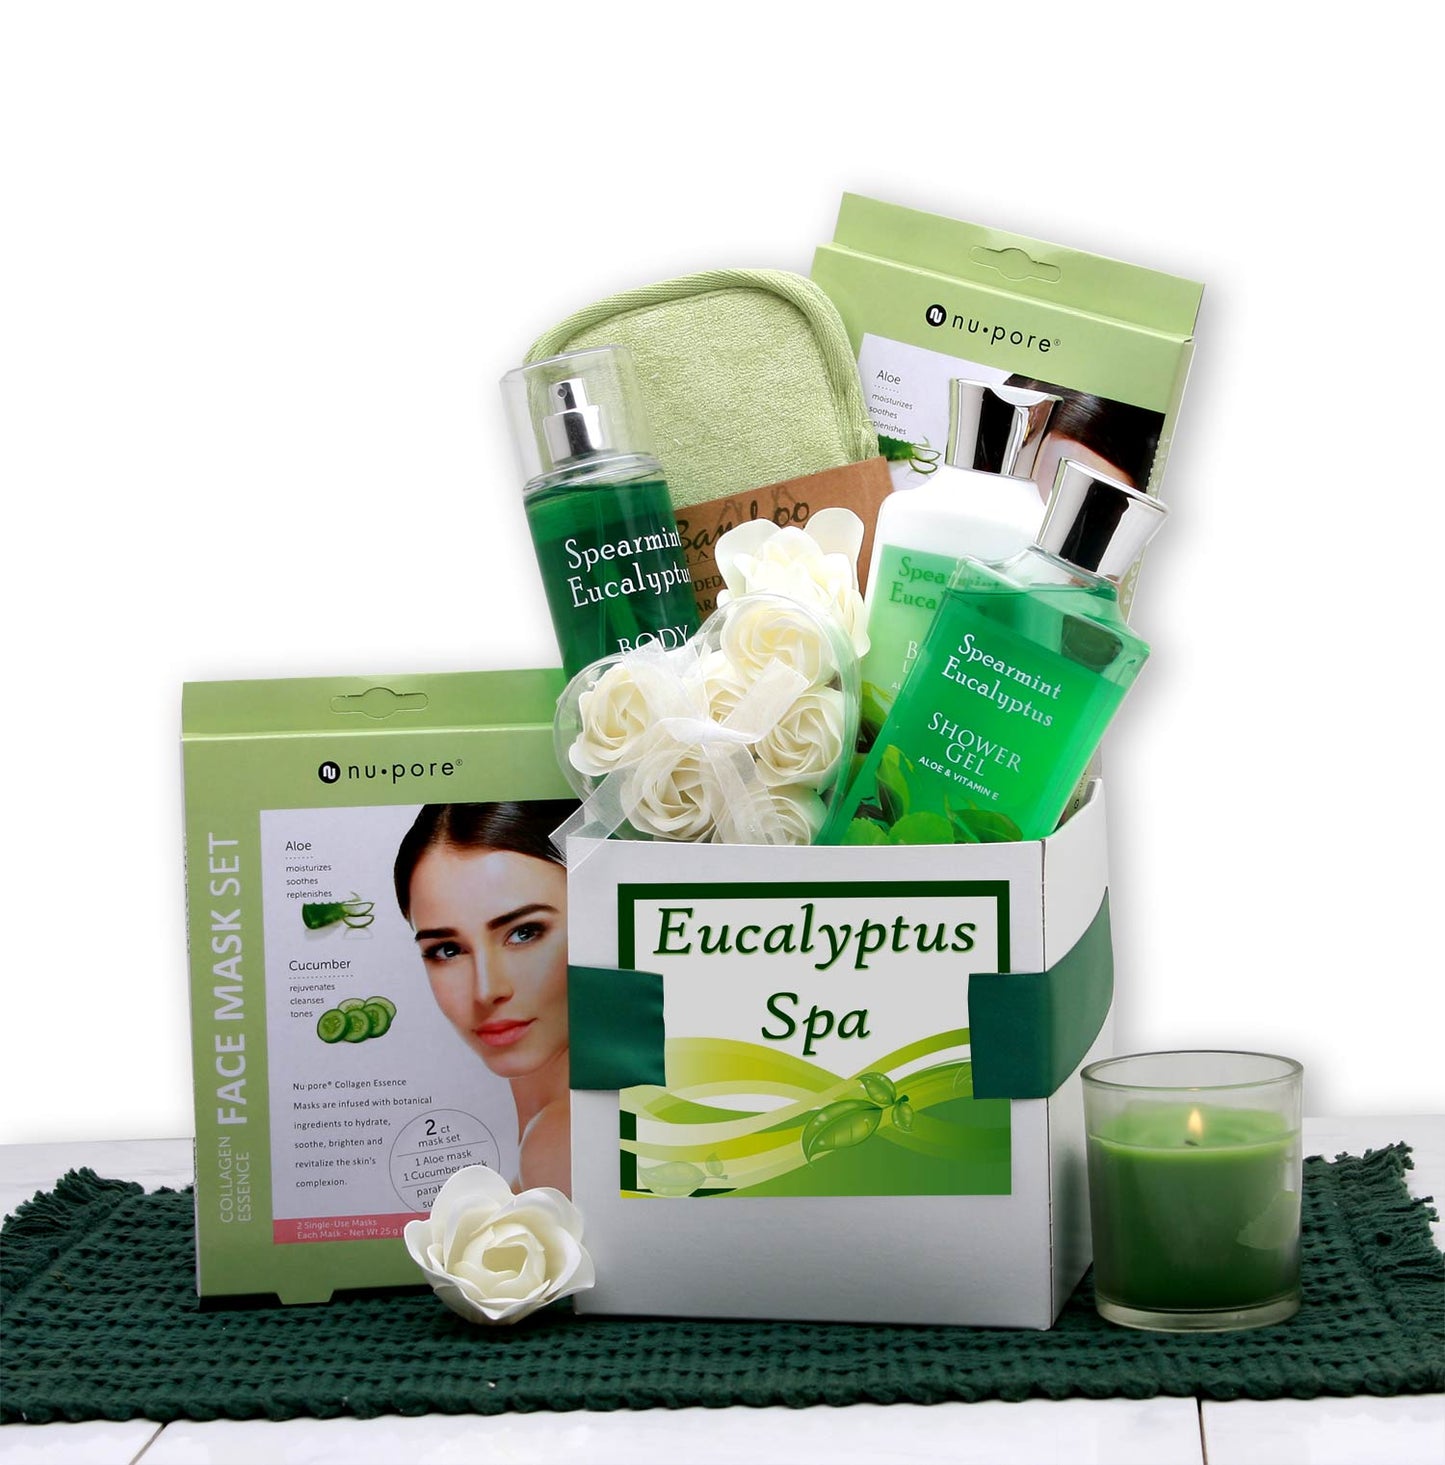 Spa Care Bundle - DB Gift Baskets Eucalyptus-themed spa care package gift basket for rejuvenating stress relief, tailored for women